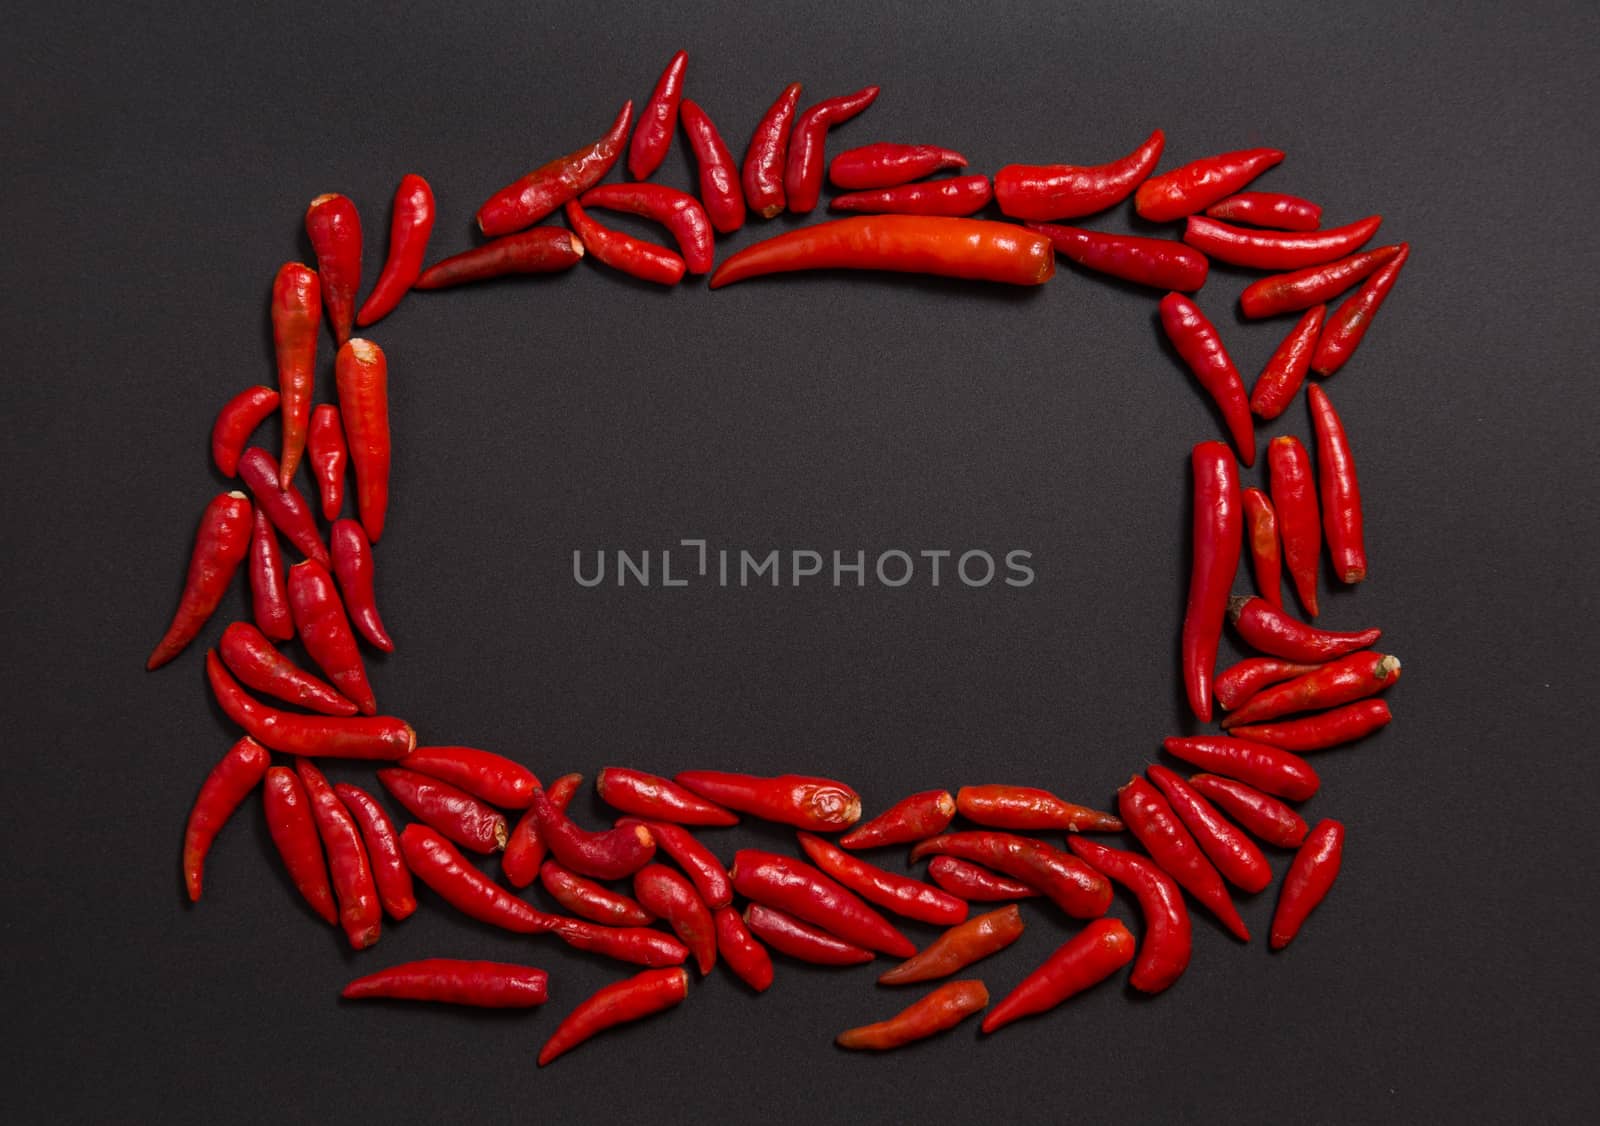 Frame made of non-stem red bird eye chili peppers on grey background 